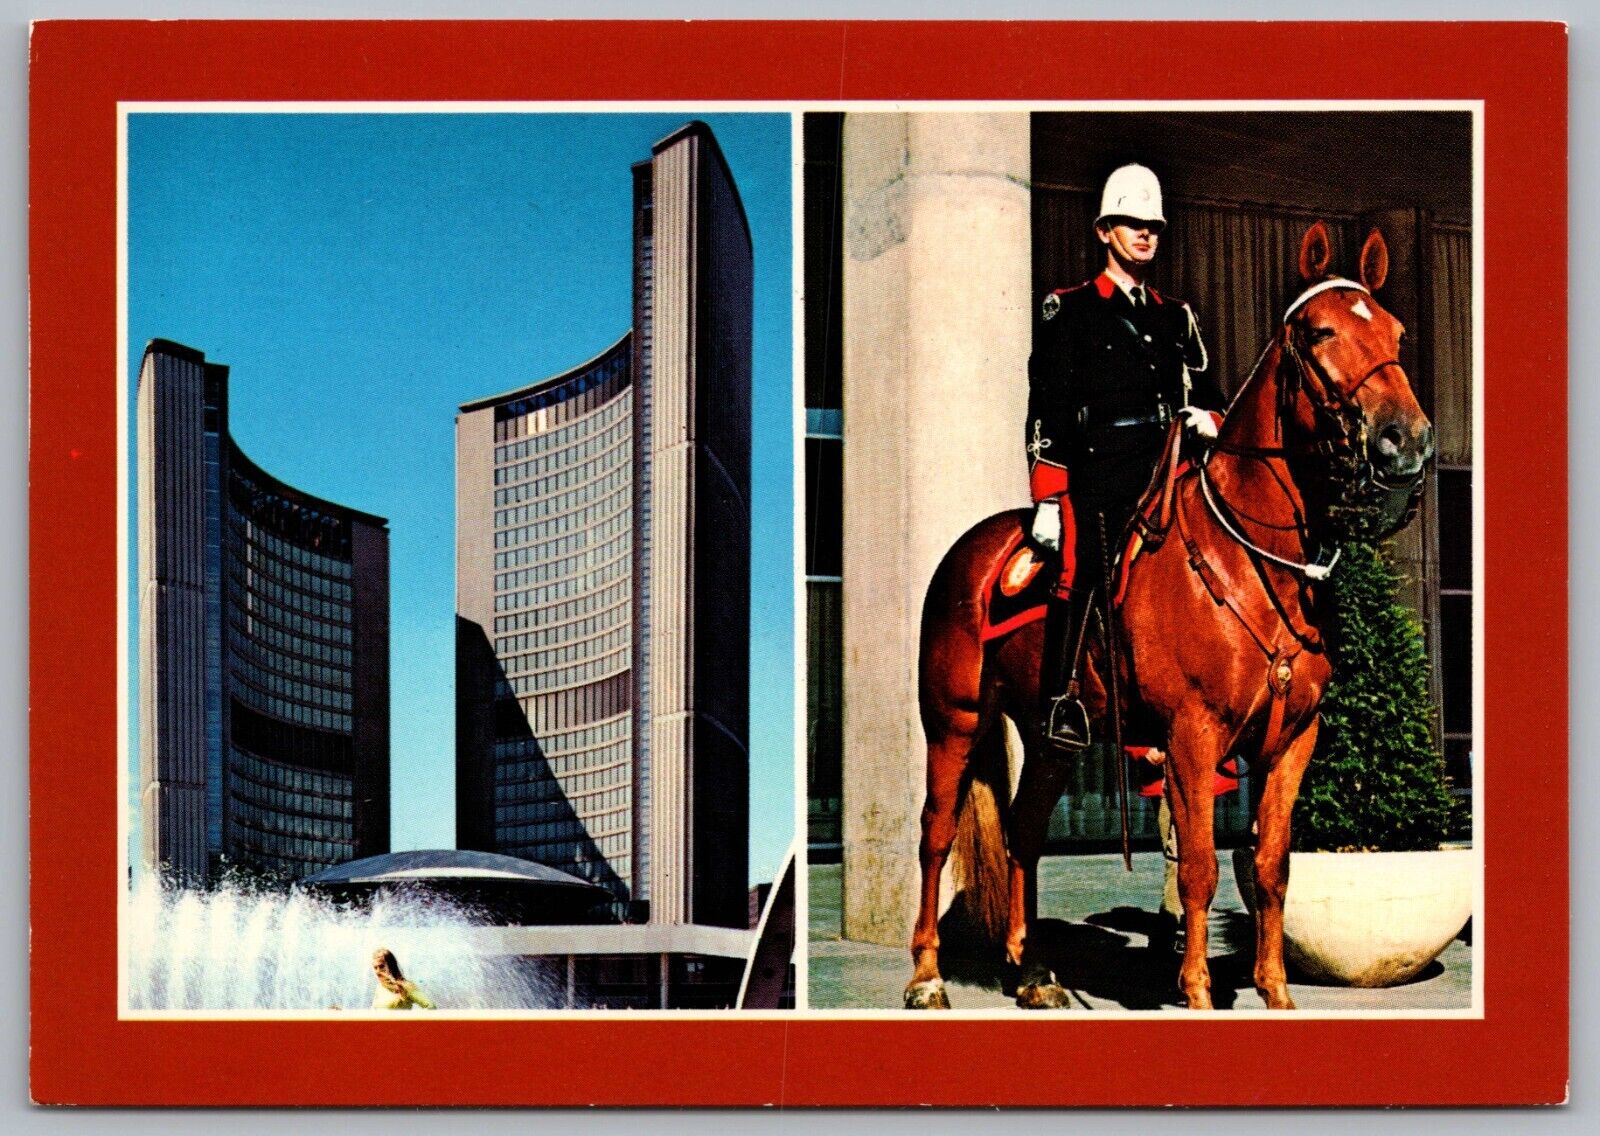 Toronto Ontario Canada Mounted Police Nathan Phillips Square City Hall Horse C2